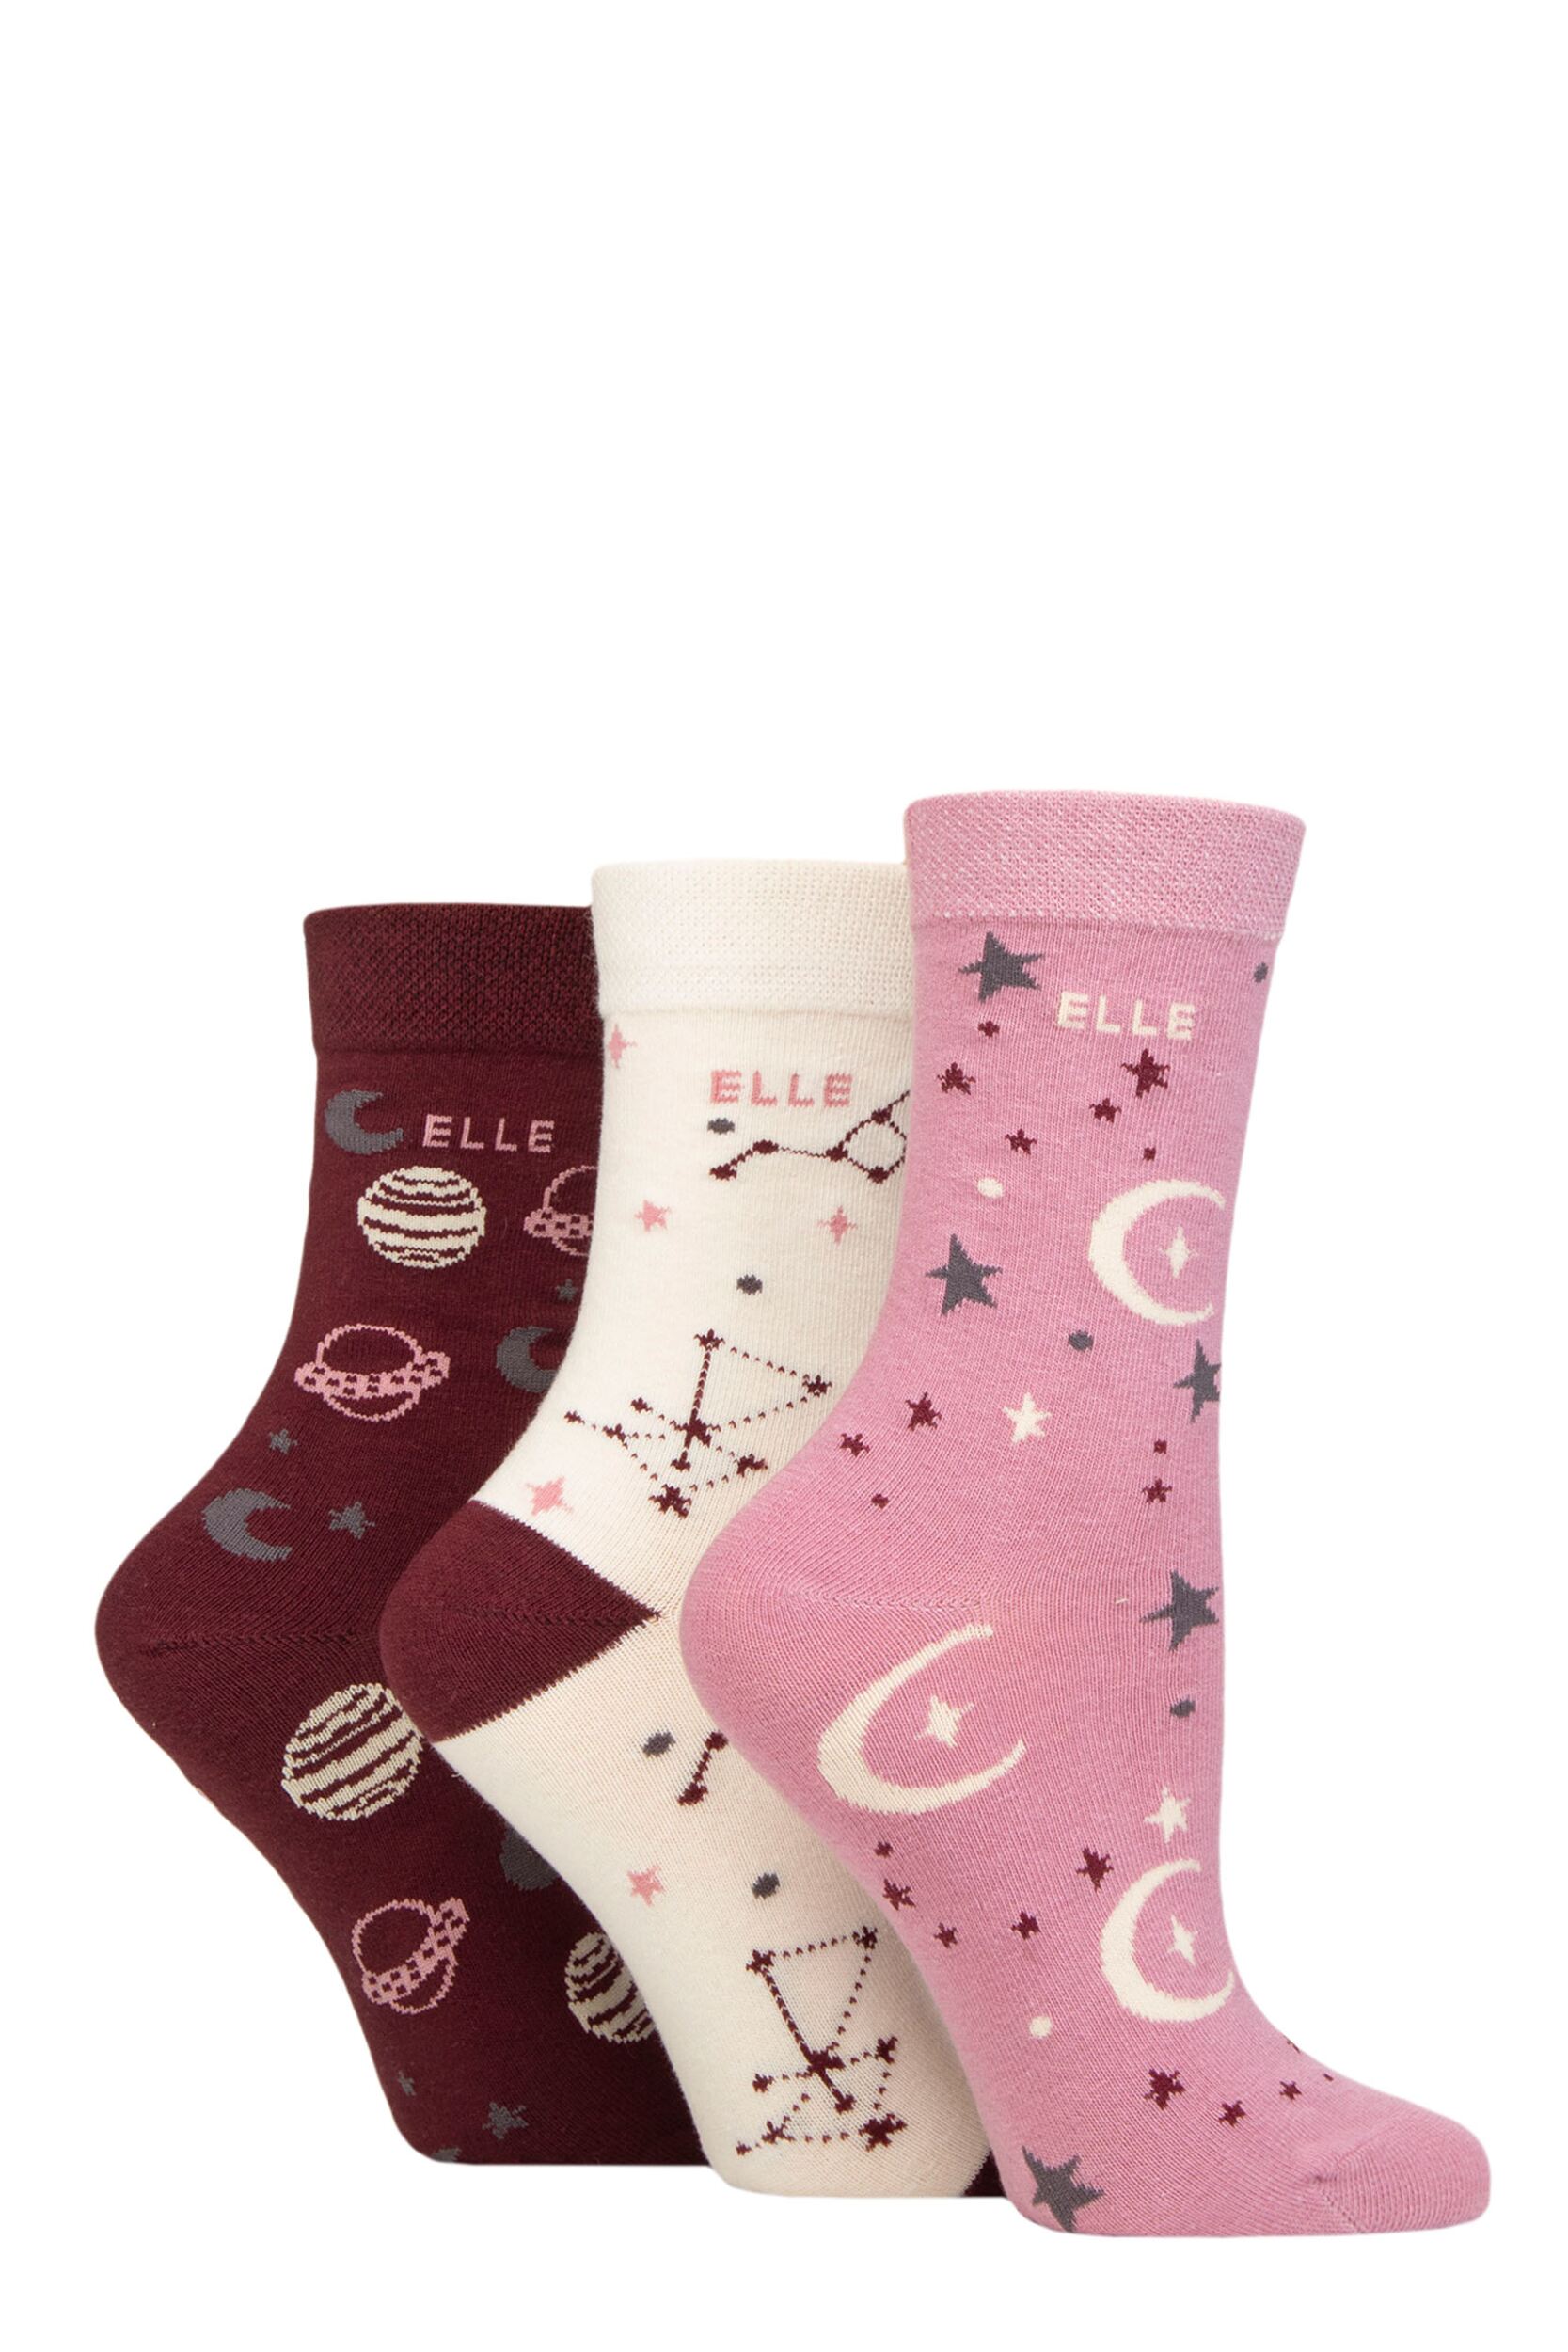 Ladies 3 Pair Elle Plain, Striped and Patterned Cotton Socks with Smooth Toes Smokey Pink Patterned 4-8